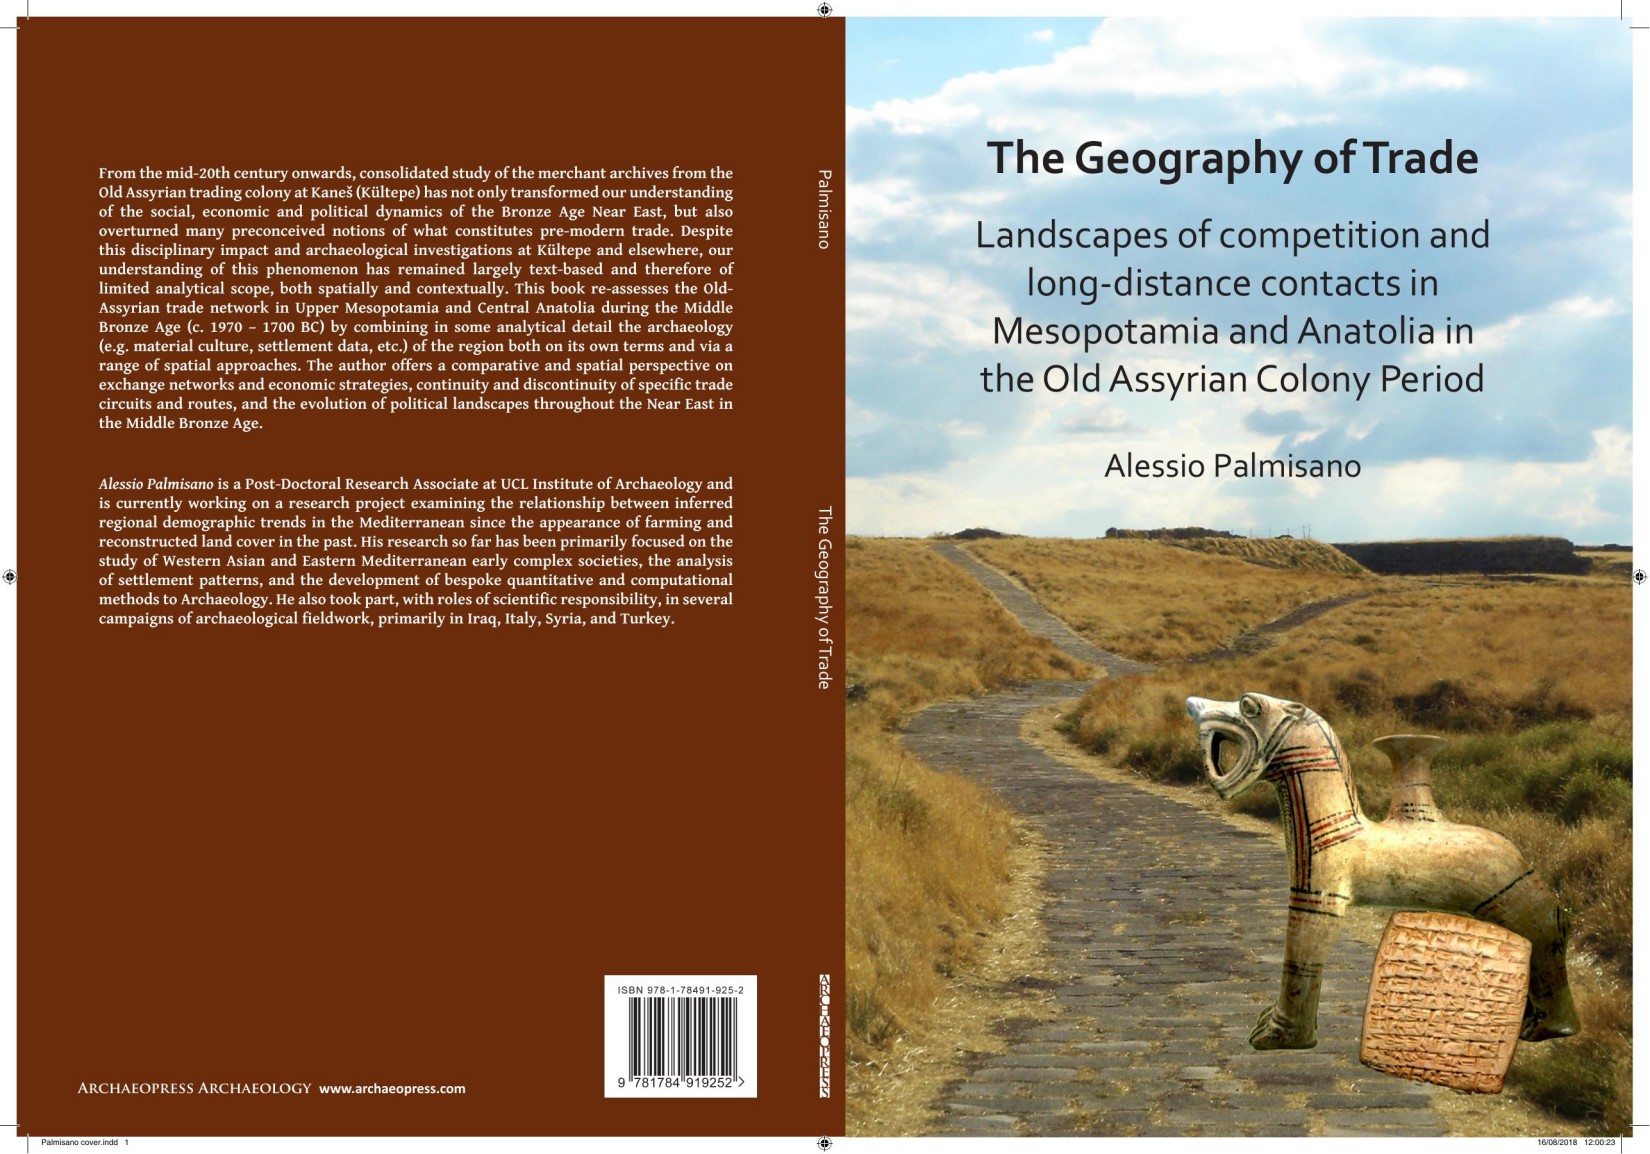 The Geography of Trade. Landscapes of competition and long-distance contacts in Mesopotamia and Anatolia in the Old Assyrian Colony Period 2018